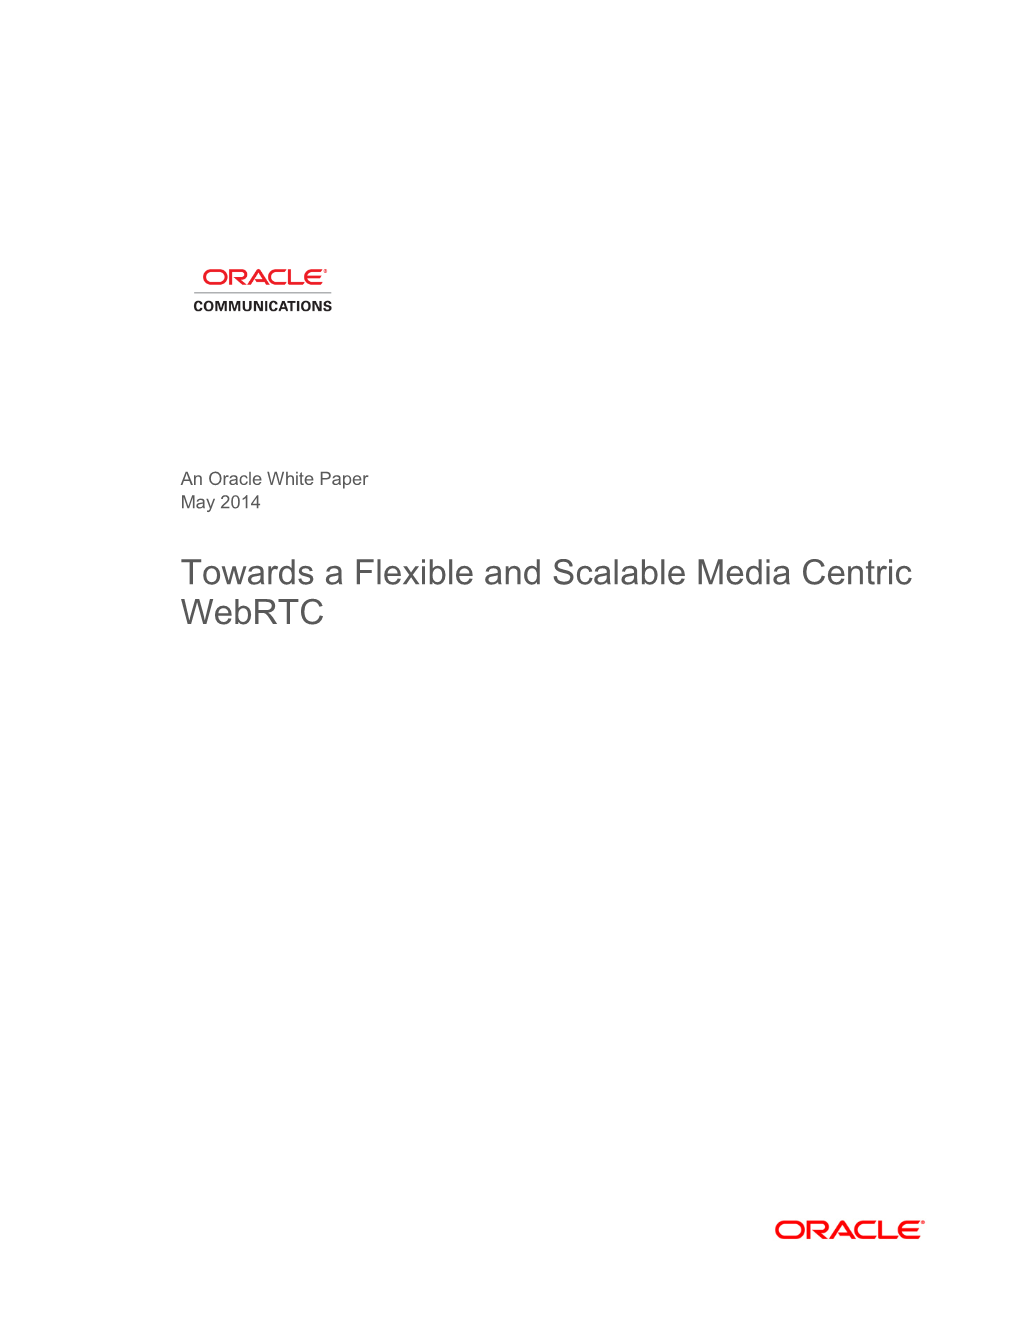 A Flexible and Scalable Media Centric Webrtc